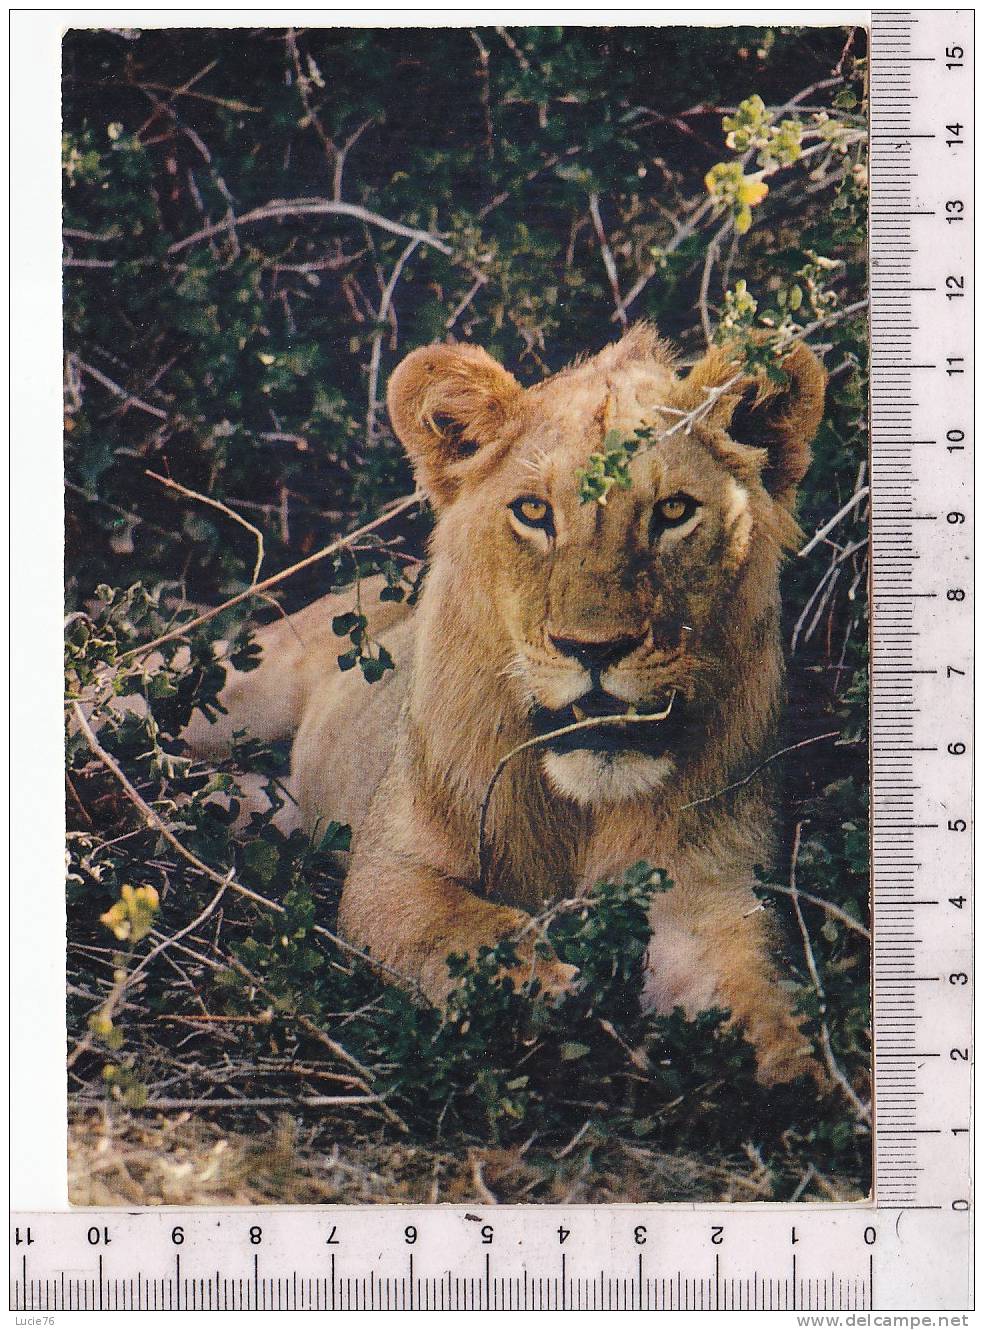 LION   -  Faune Africaine - N°   4 299 - Lions